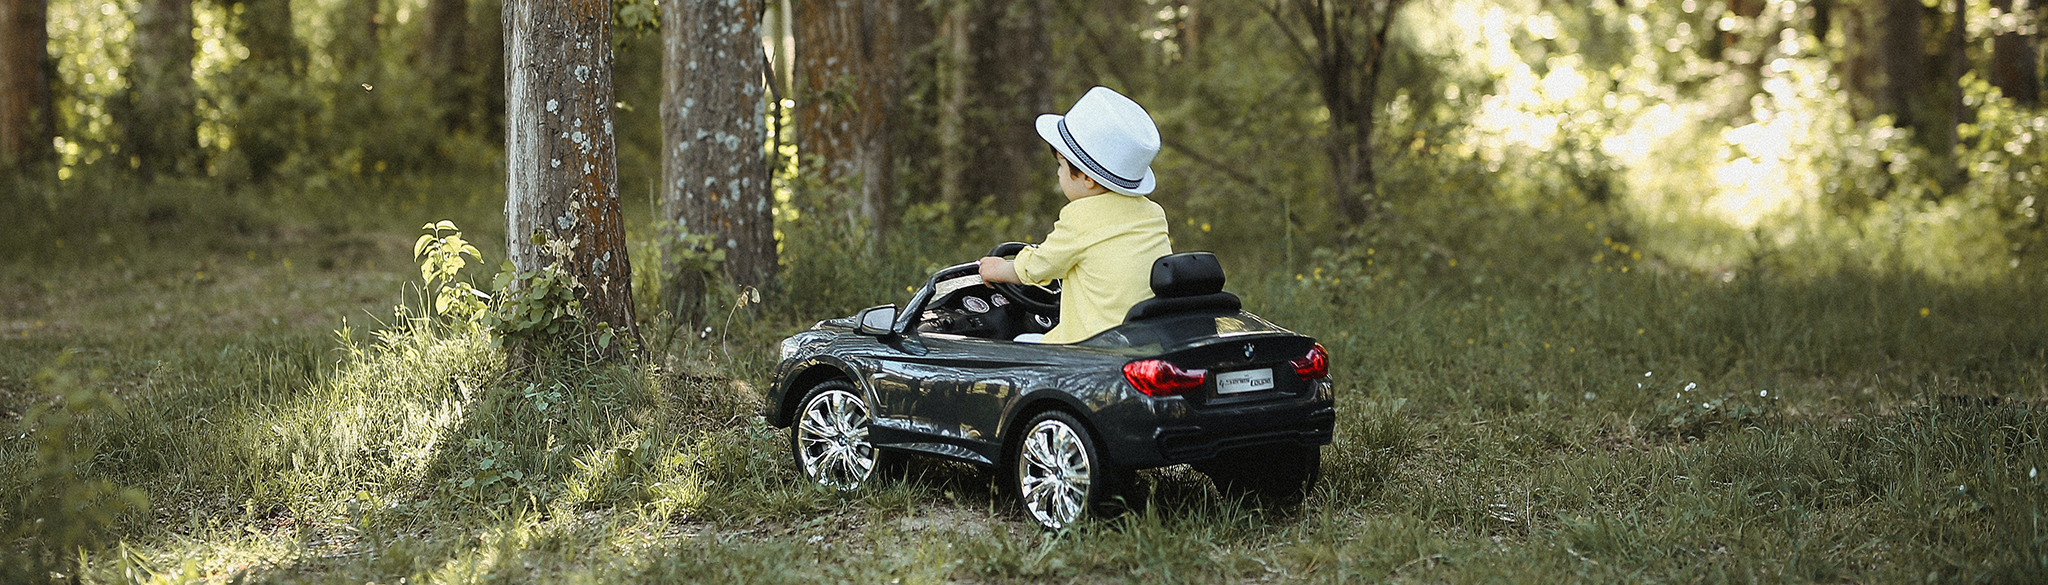 Child driving toy car